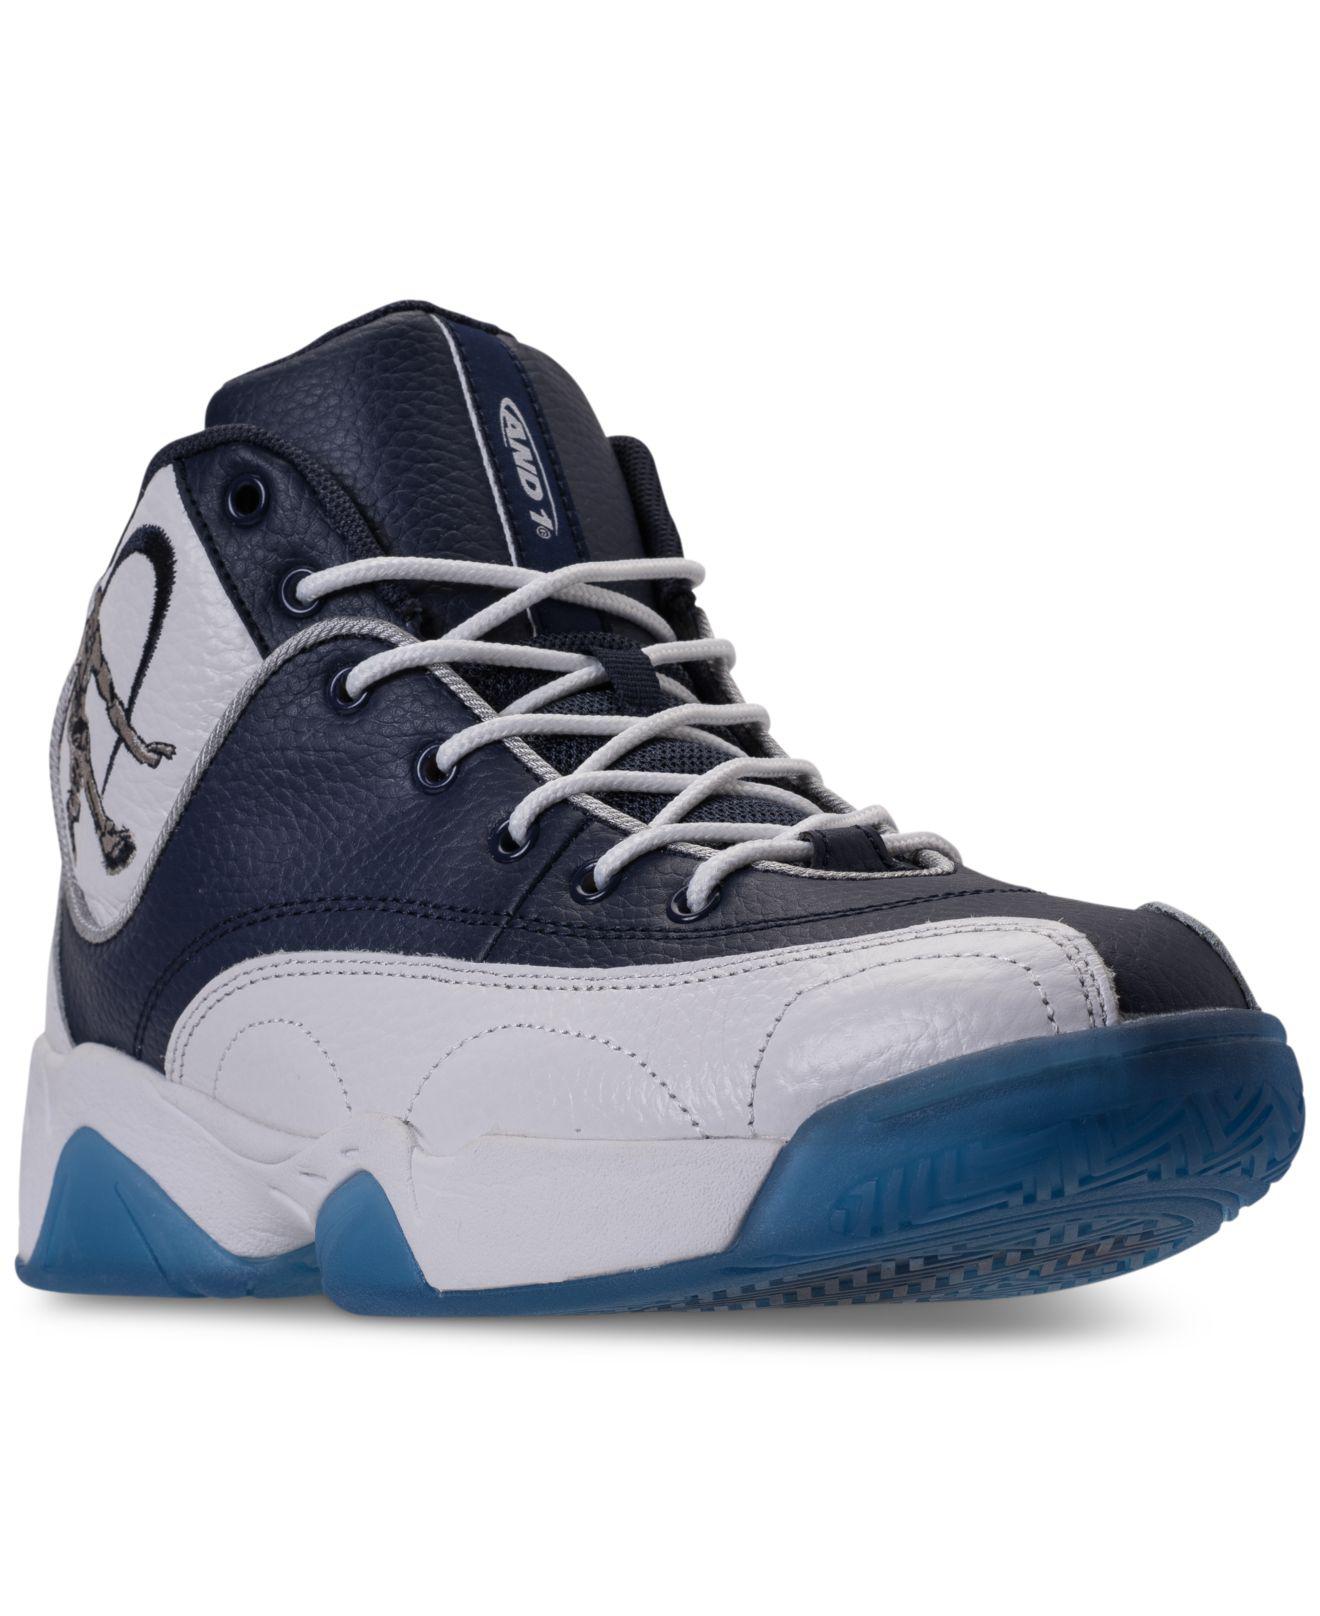 AND1 Leather Men's Coney Island Classic Basketball Sneakers From Finish  Line in Black/White/Navy (Blue) for Men - Lyst